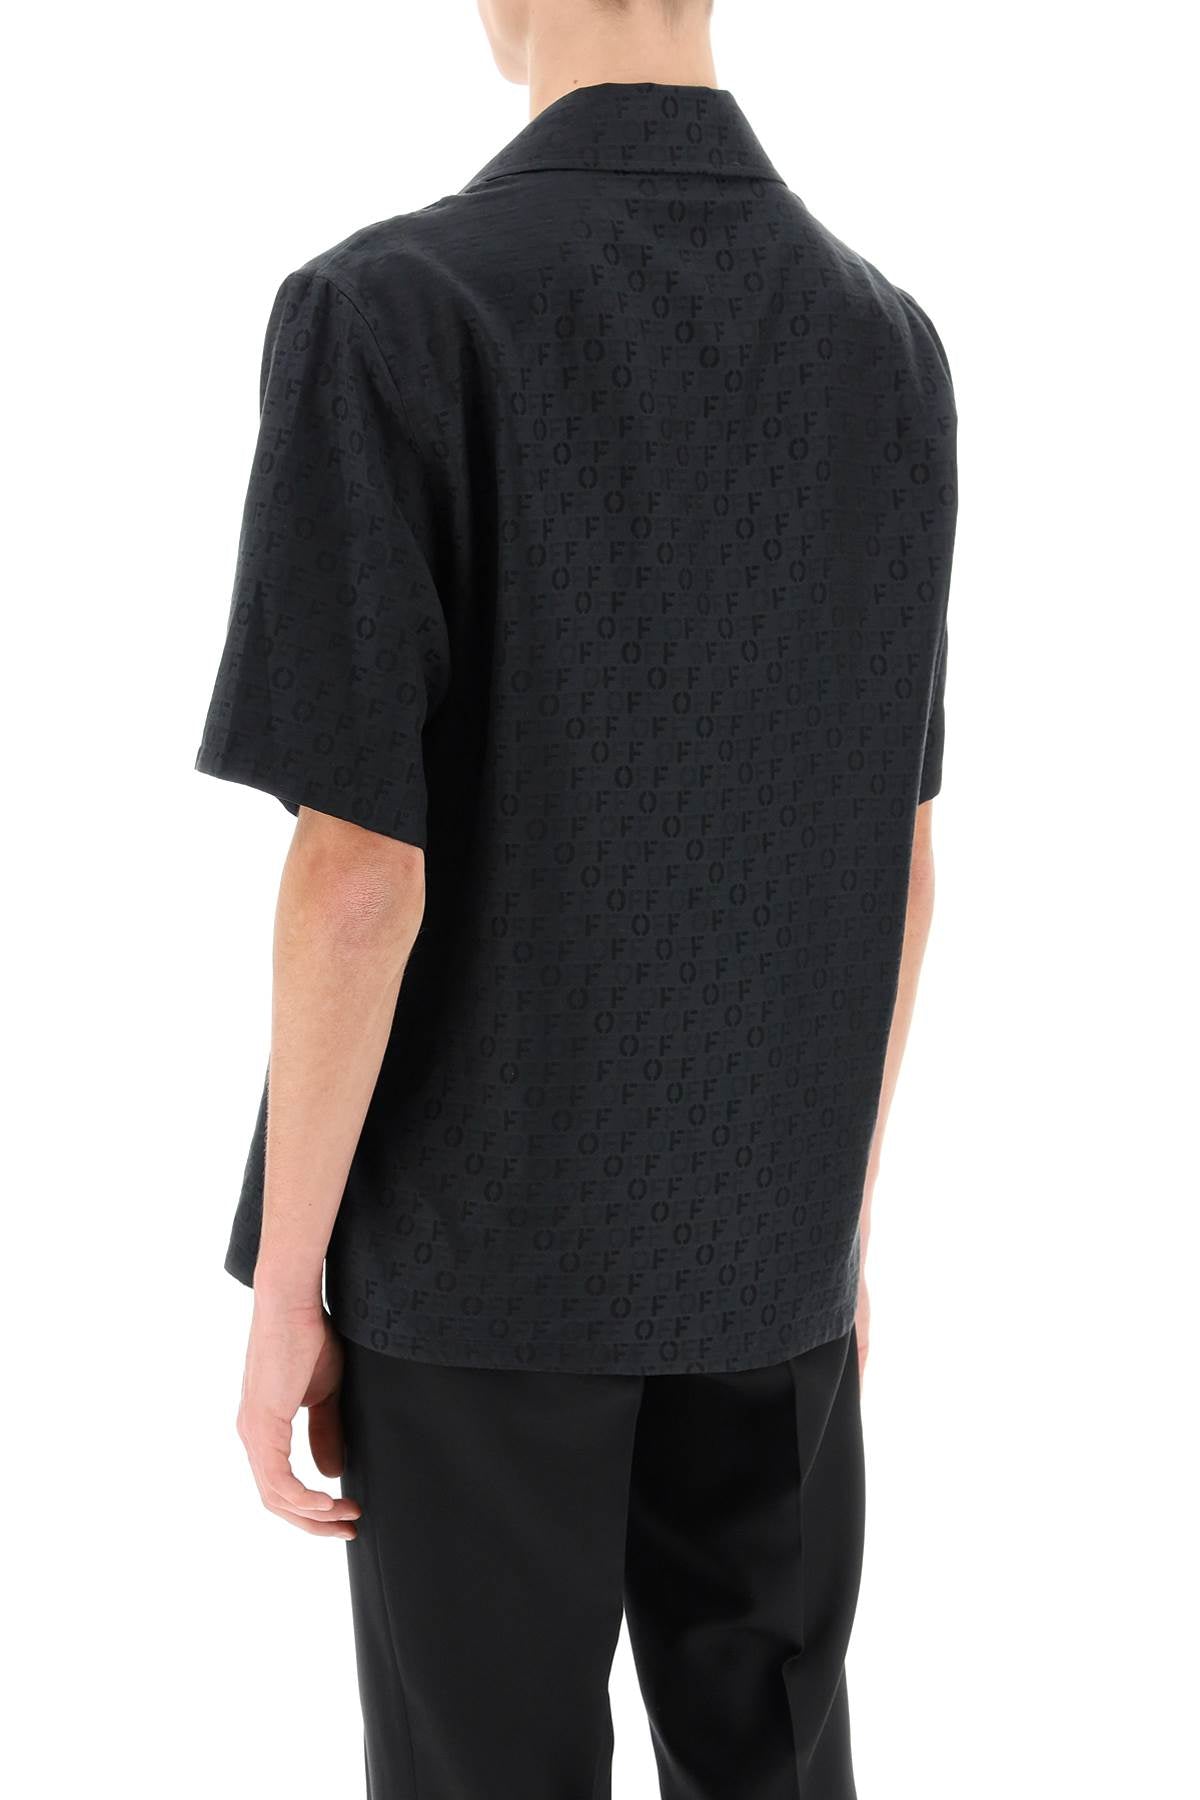 OFF-WHITE Holiday Bowling Shirt with Tonal Jacquard Pattern for Men